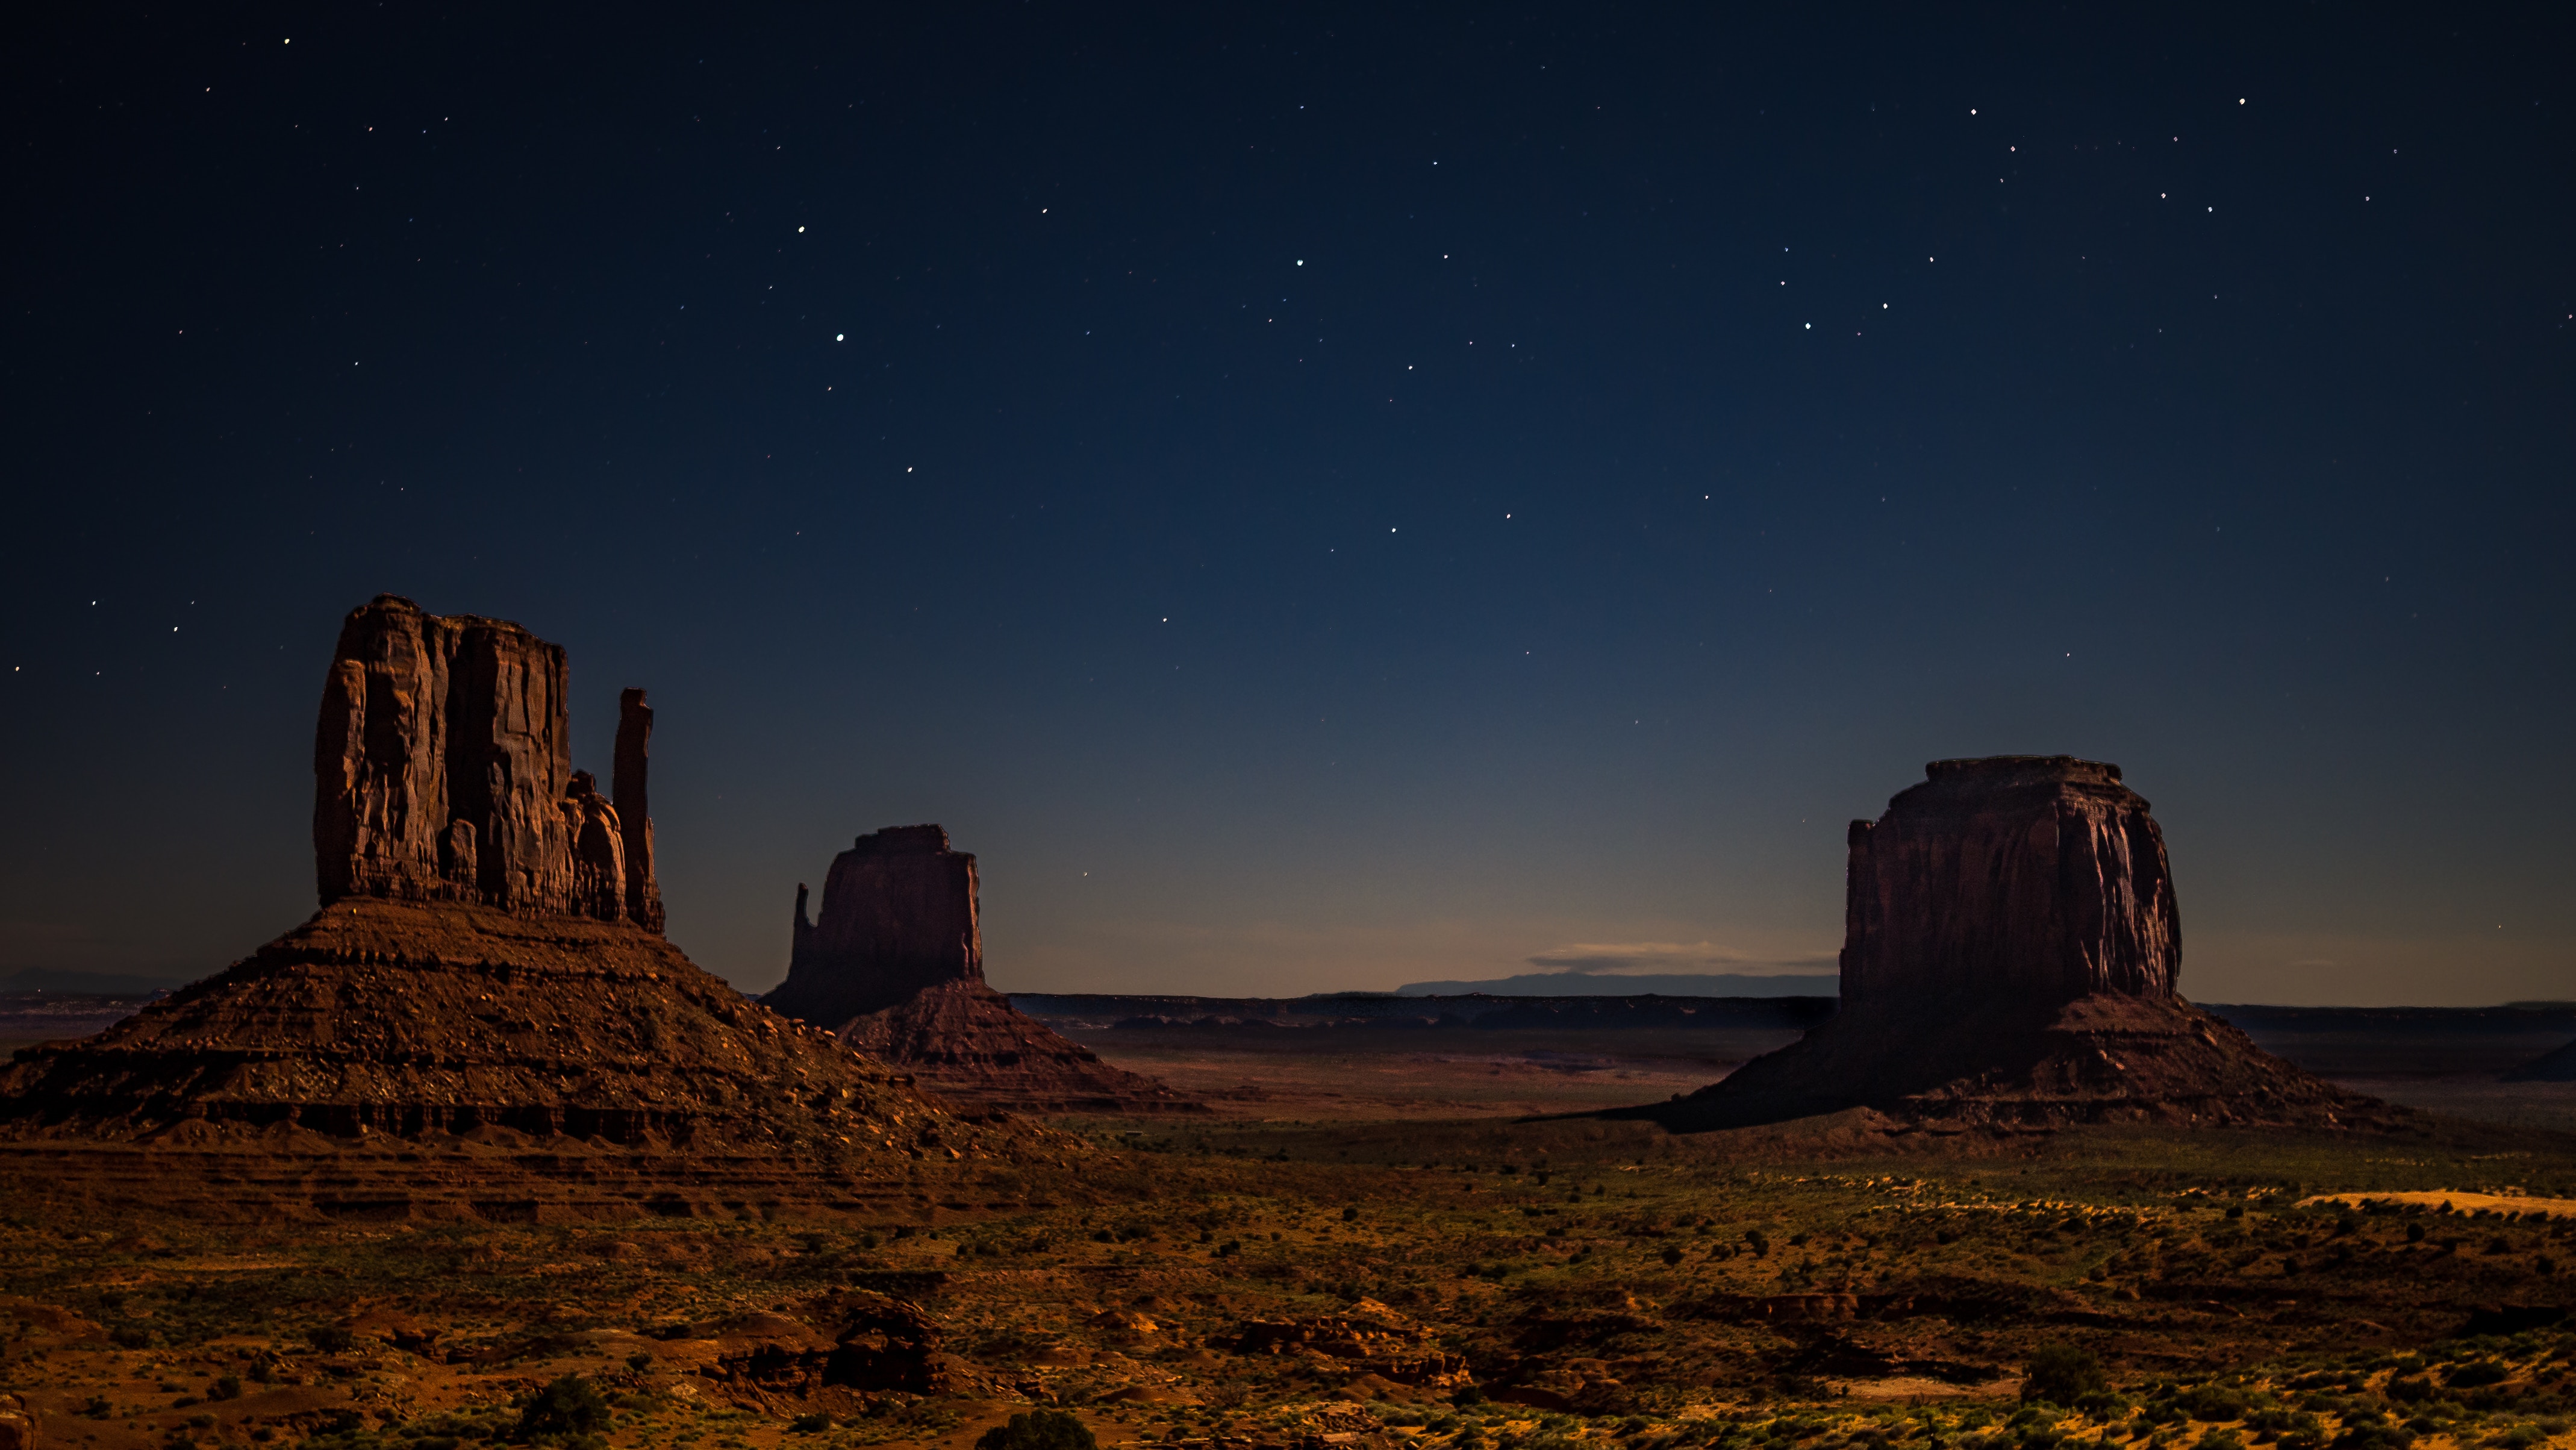 General 4277x2407 desert starry night landscape nature low light Monument Valley USA